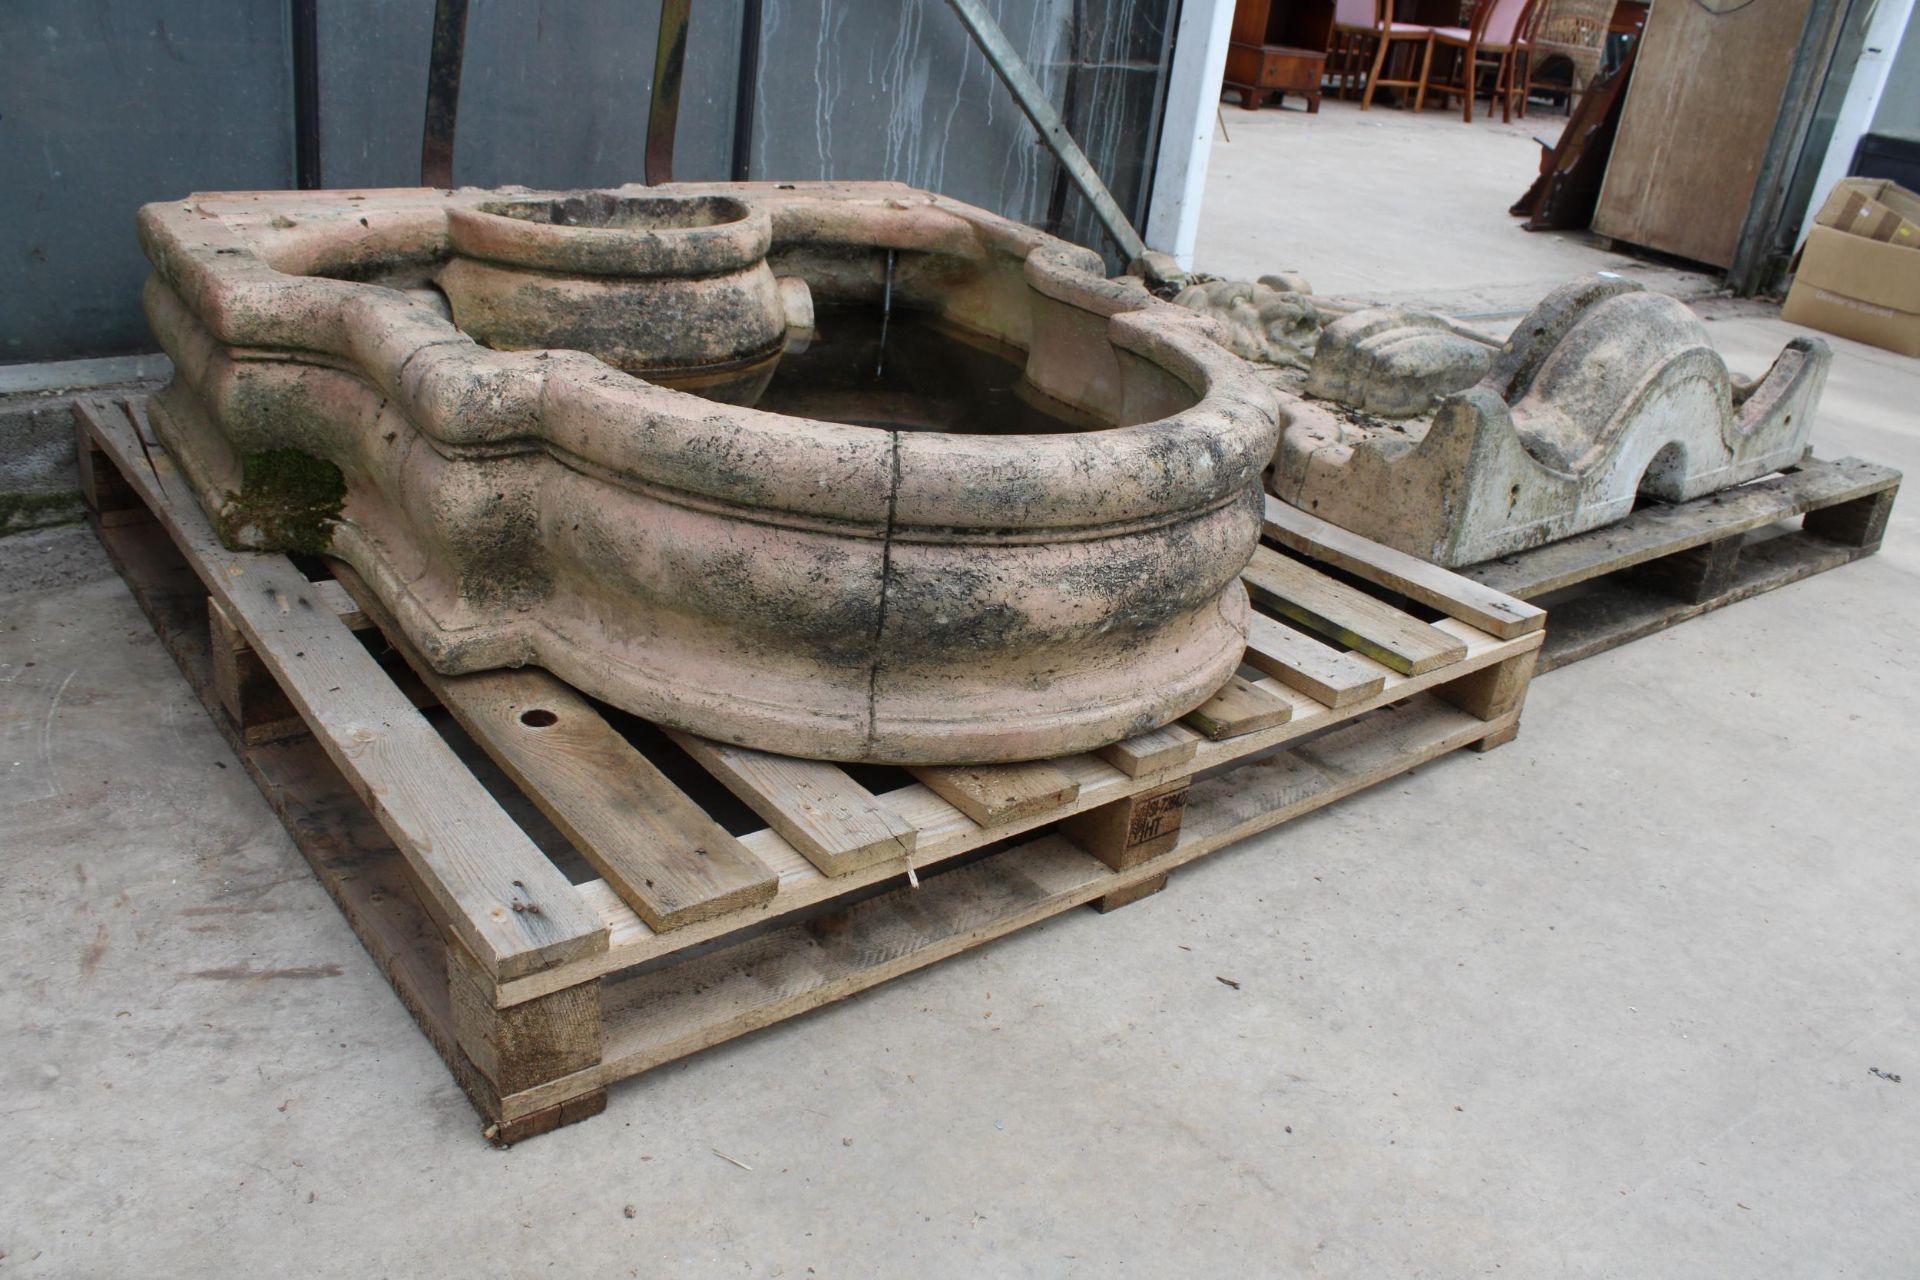 AN EXTREMELY LARGE AND HEAVY RECONSTITUTED STONE WATER FEATURE WITH LION HEAD DETAIL - Image 4 of 4